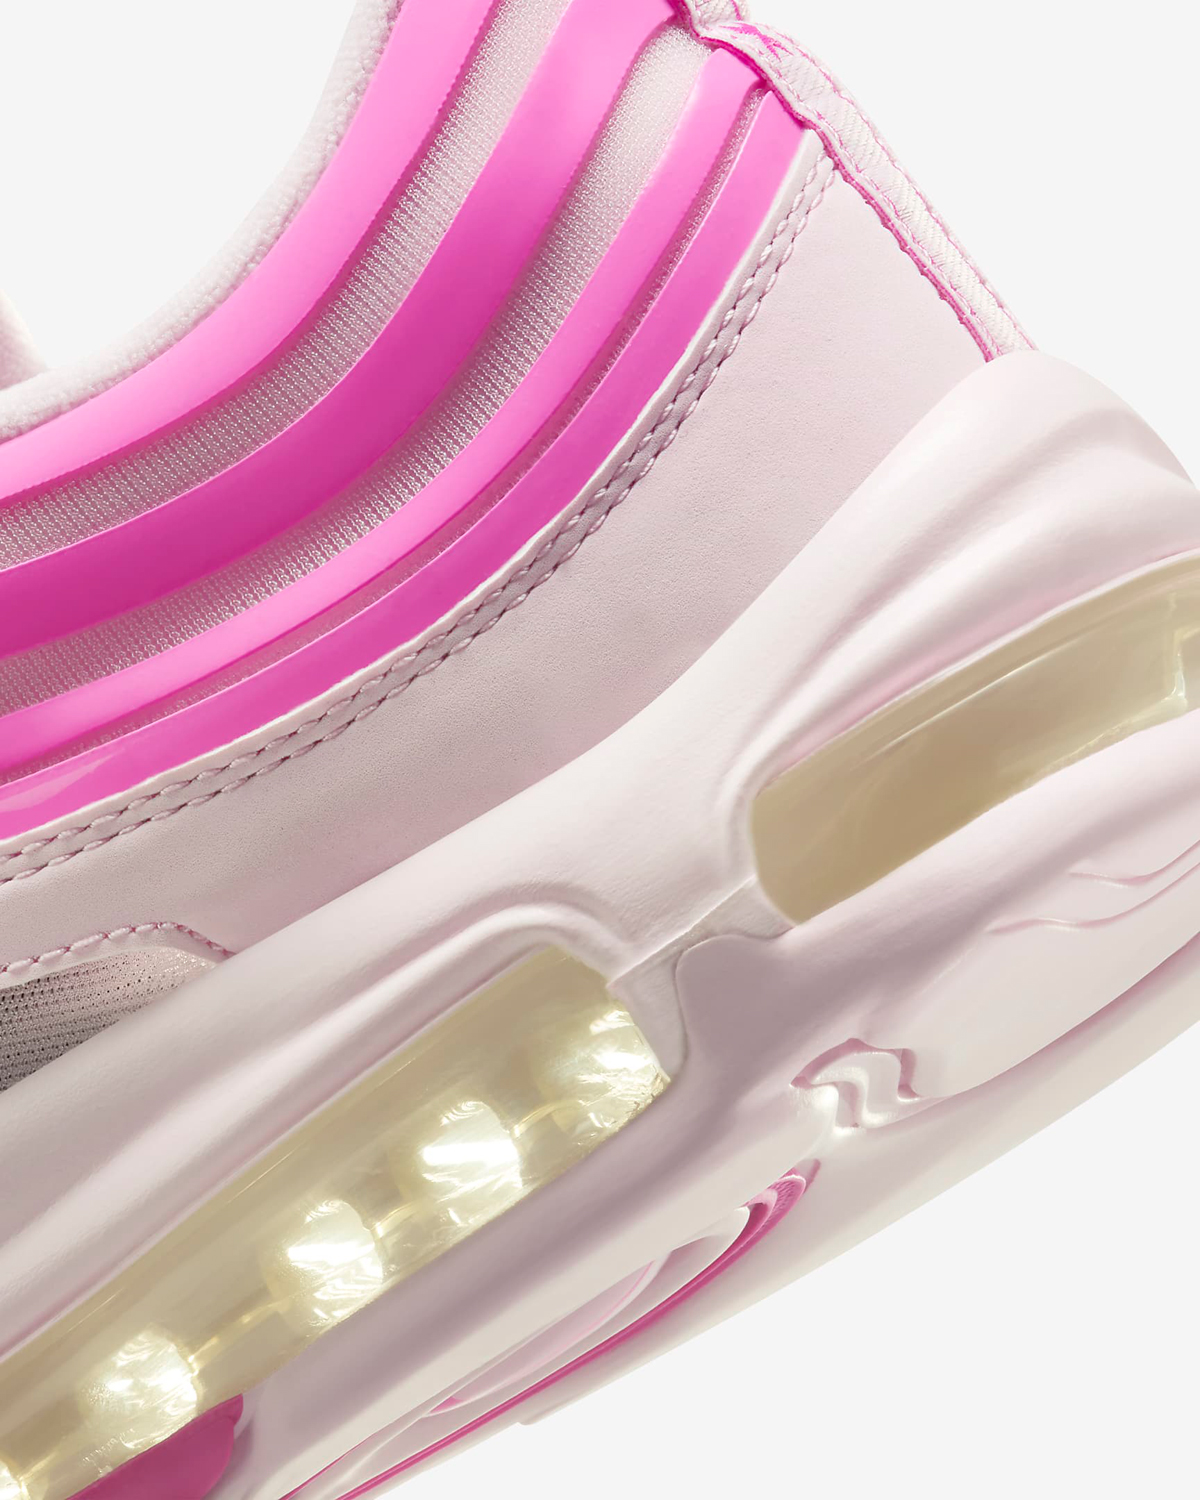 Nike-Air-Max-97-Pink-Foam-Playful-Pink-Release-Date-8